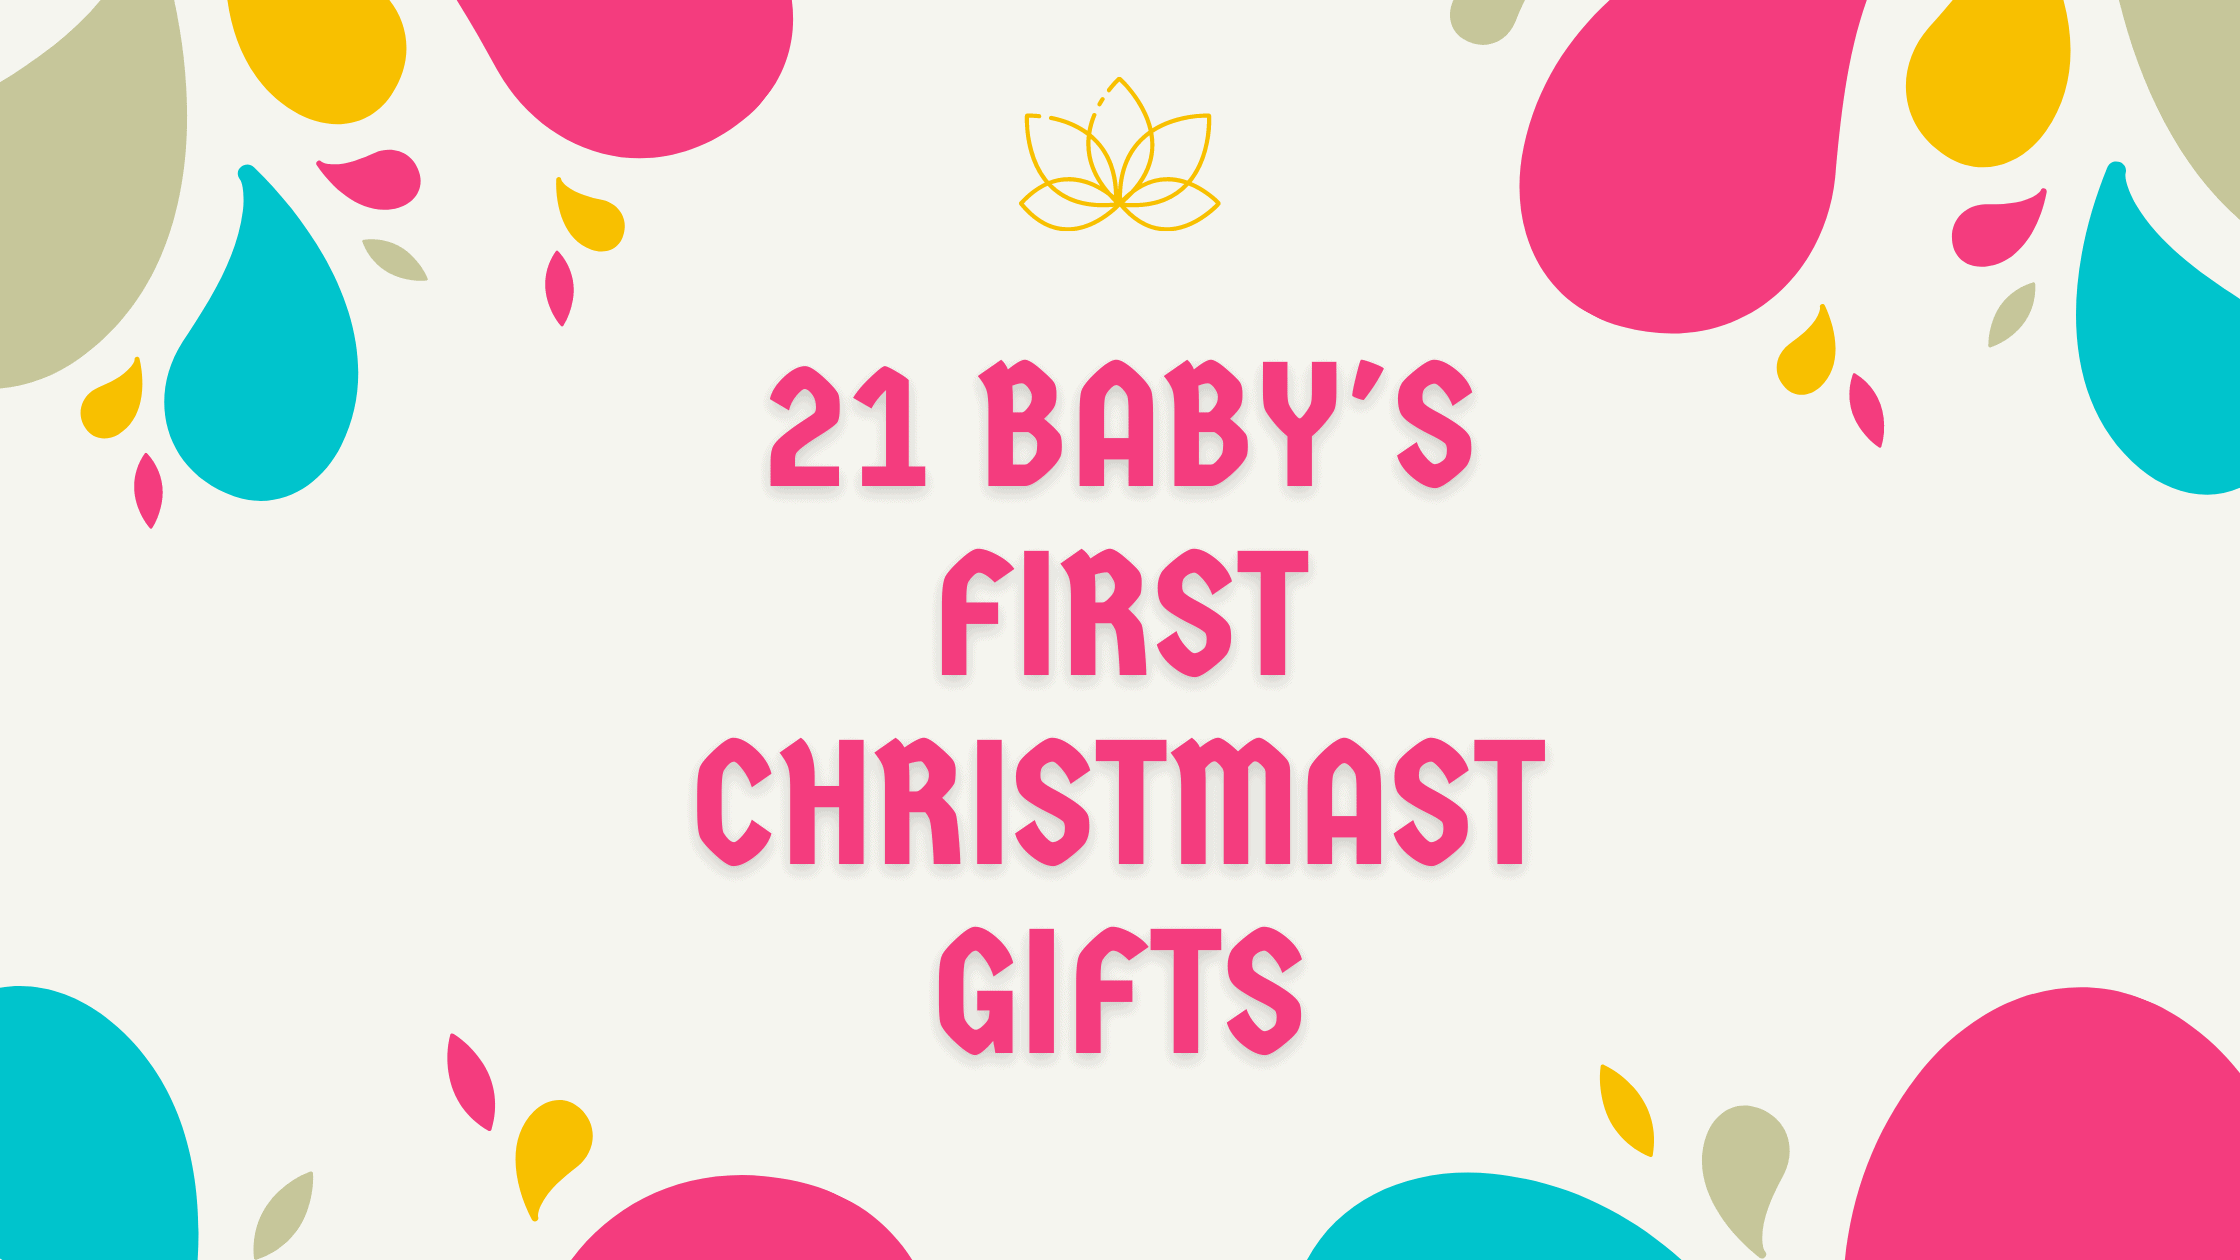 21 Best Baby’s First Christmas Gifts For a Very Special Holiday (2022)